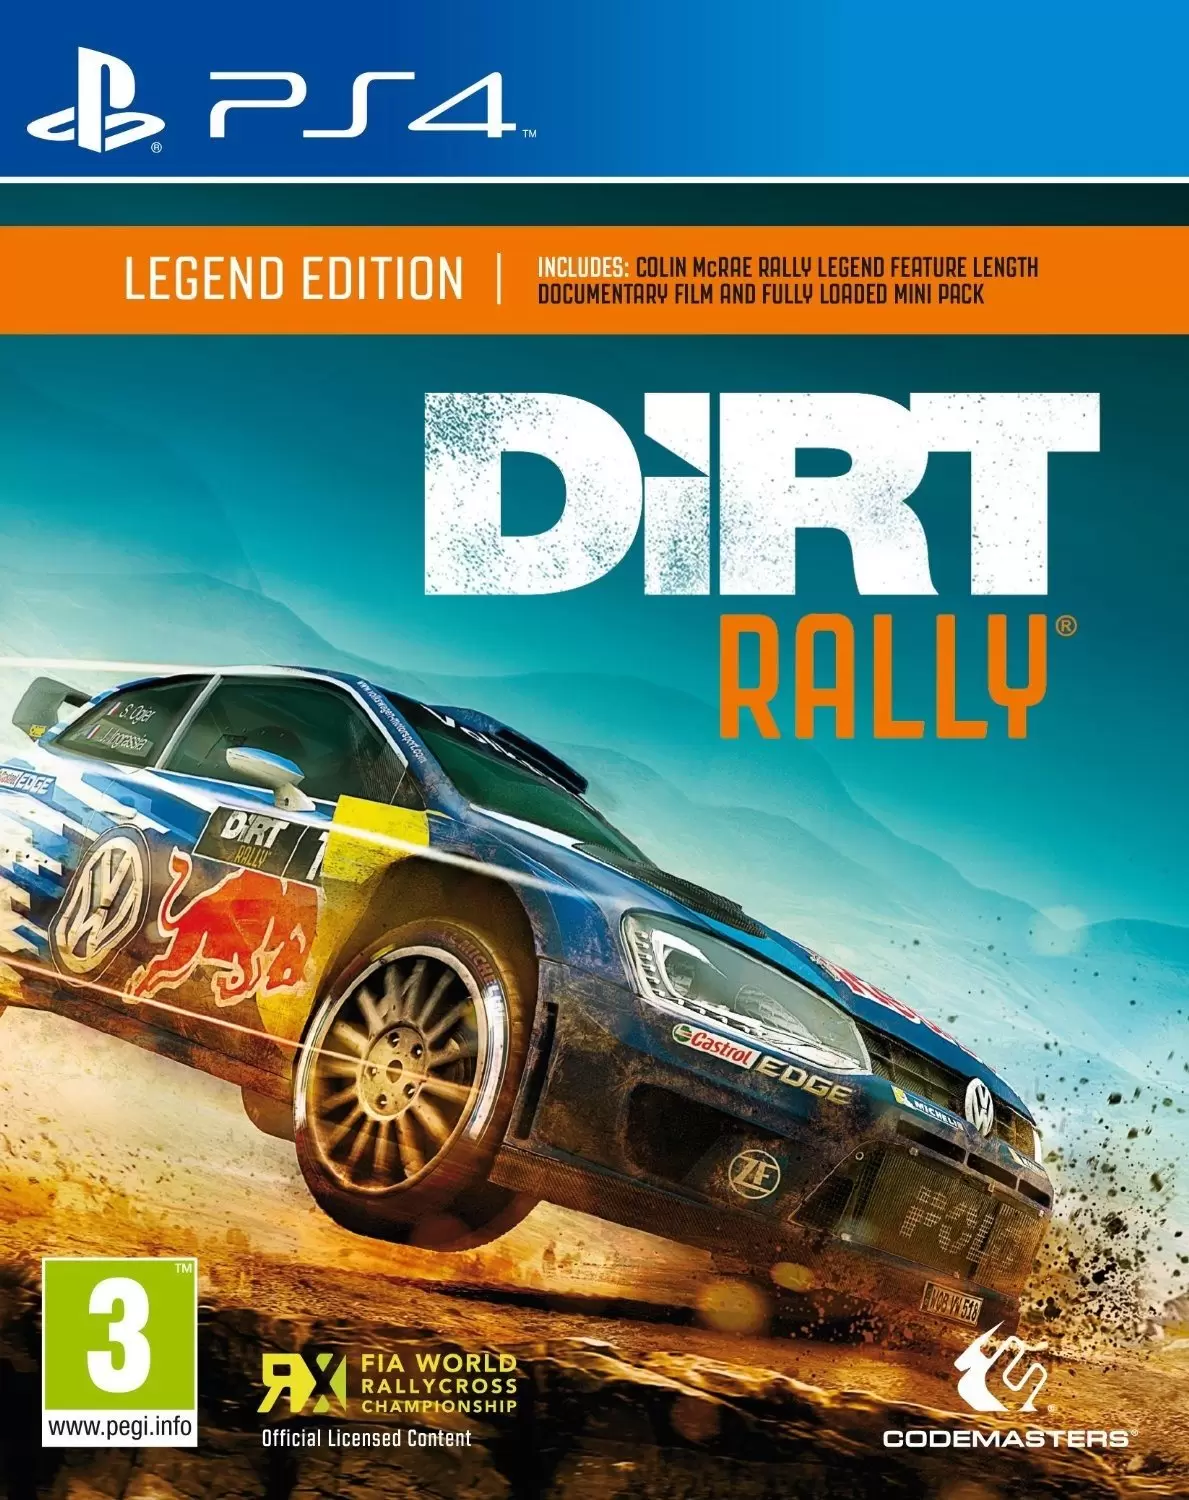 PS4 Games - Dirt Rally Legend Edition